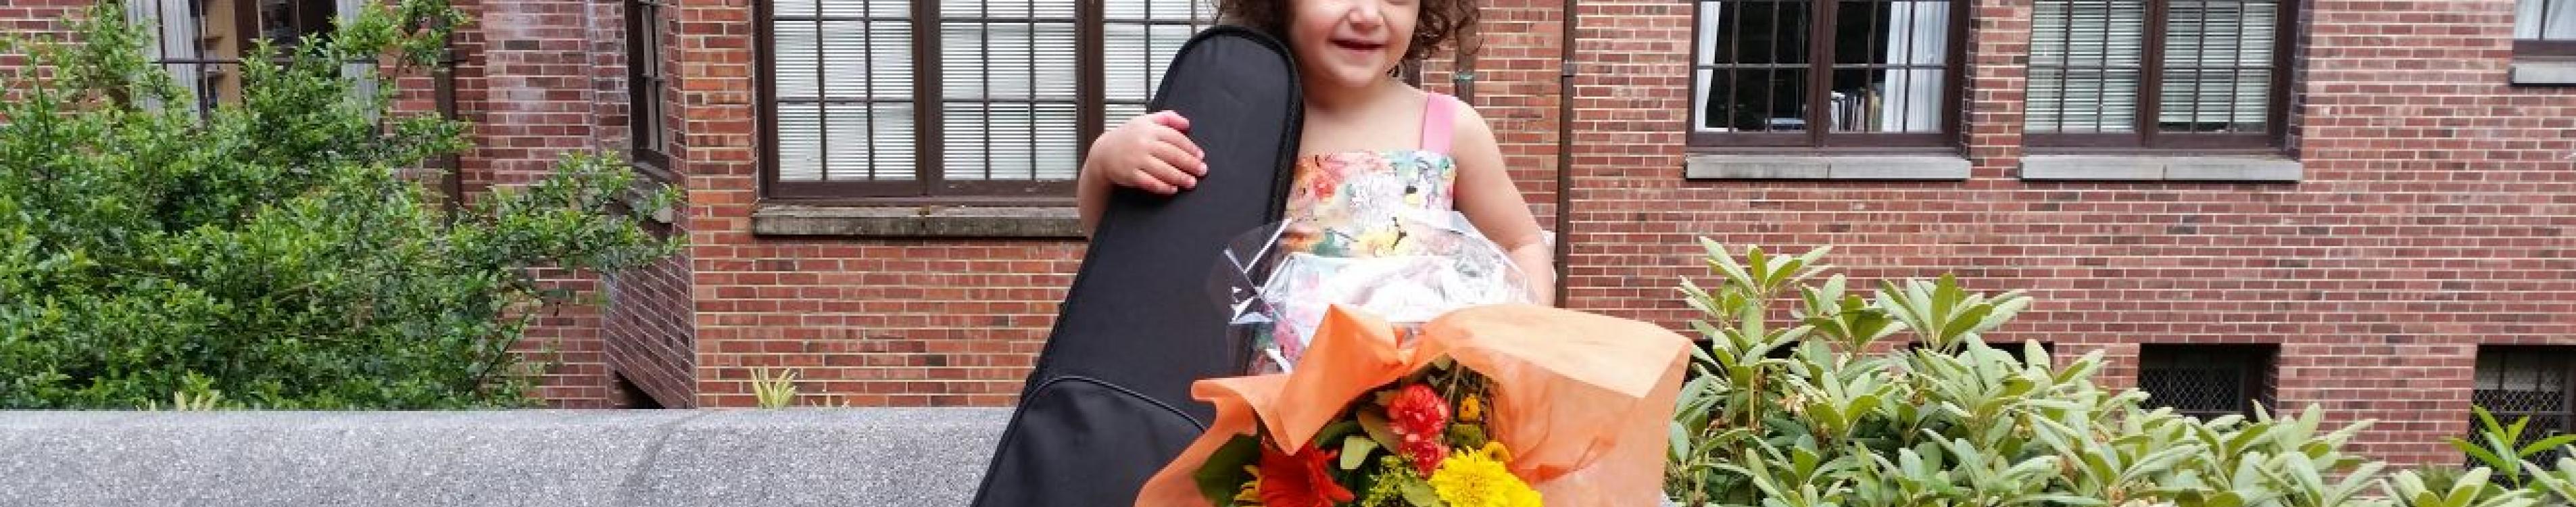 Young girl holding a flower bouquet and violin